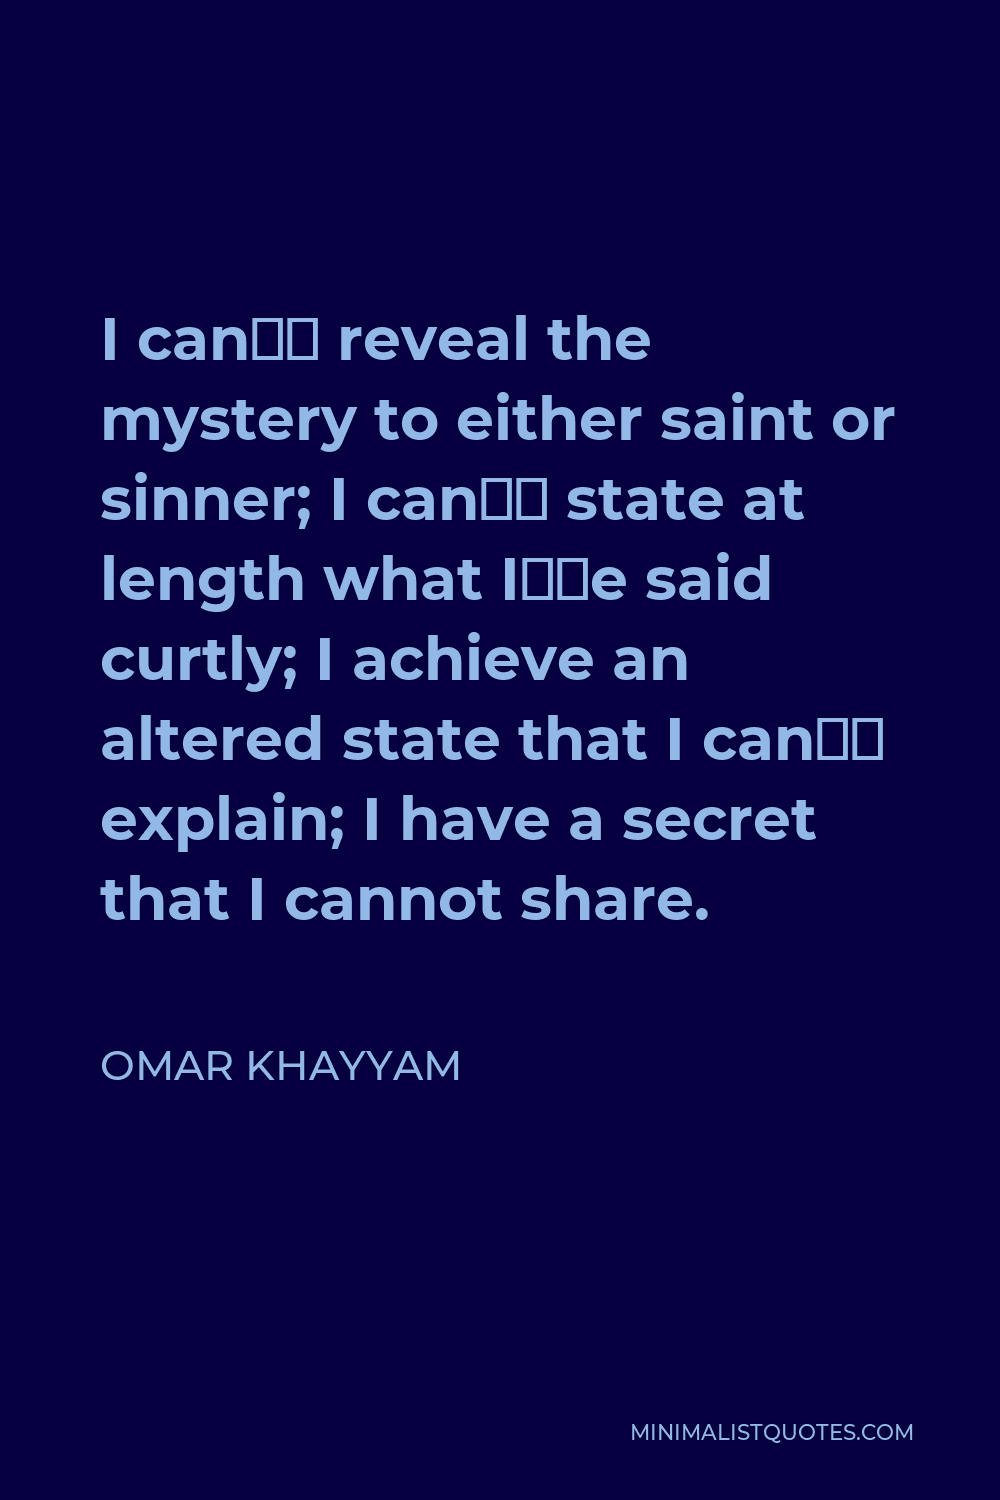 Omar Khayyam Quote - I can’t reveal the mystery to either saint or sinner; I can’t state at length what I’ve said curtly; I achieve an altered state that I can’t explain; I have a secret that I cannot share.